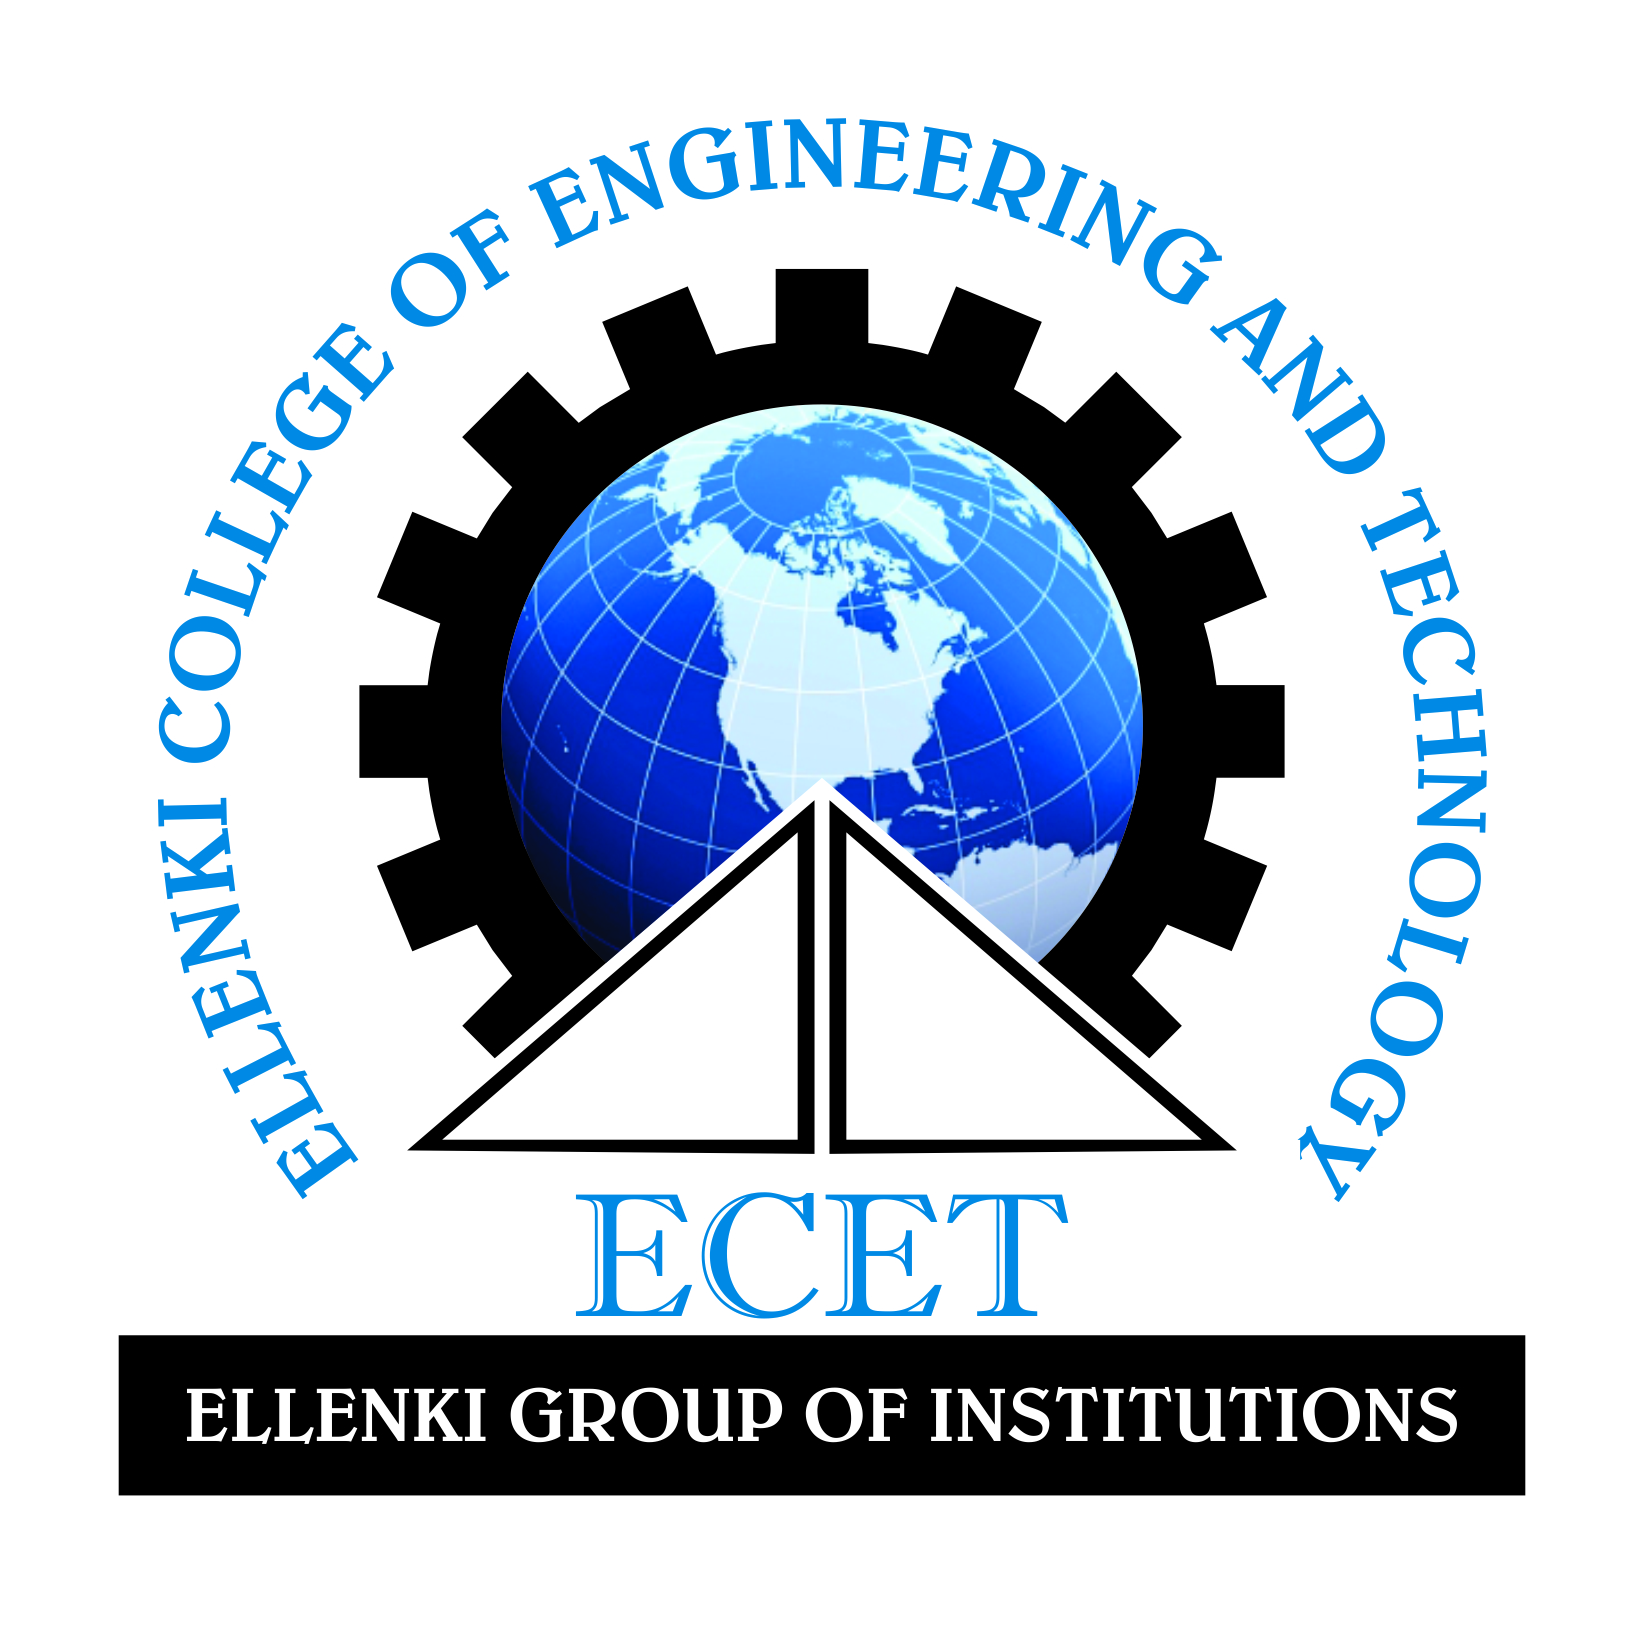 ELLENKI COLLEGE OF ENGINEERING AND TECHNOLOGY